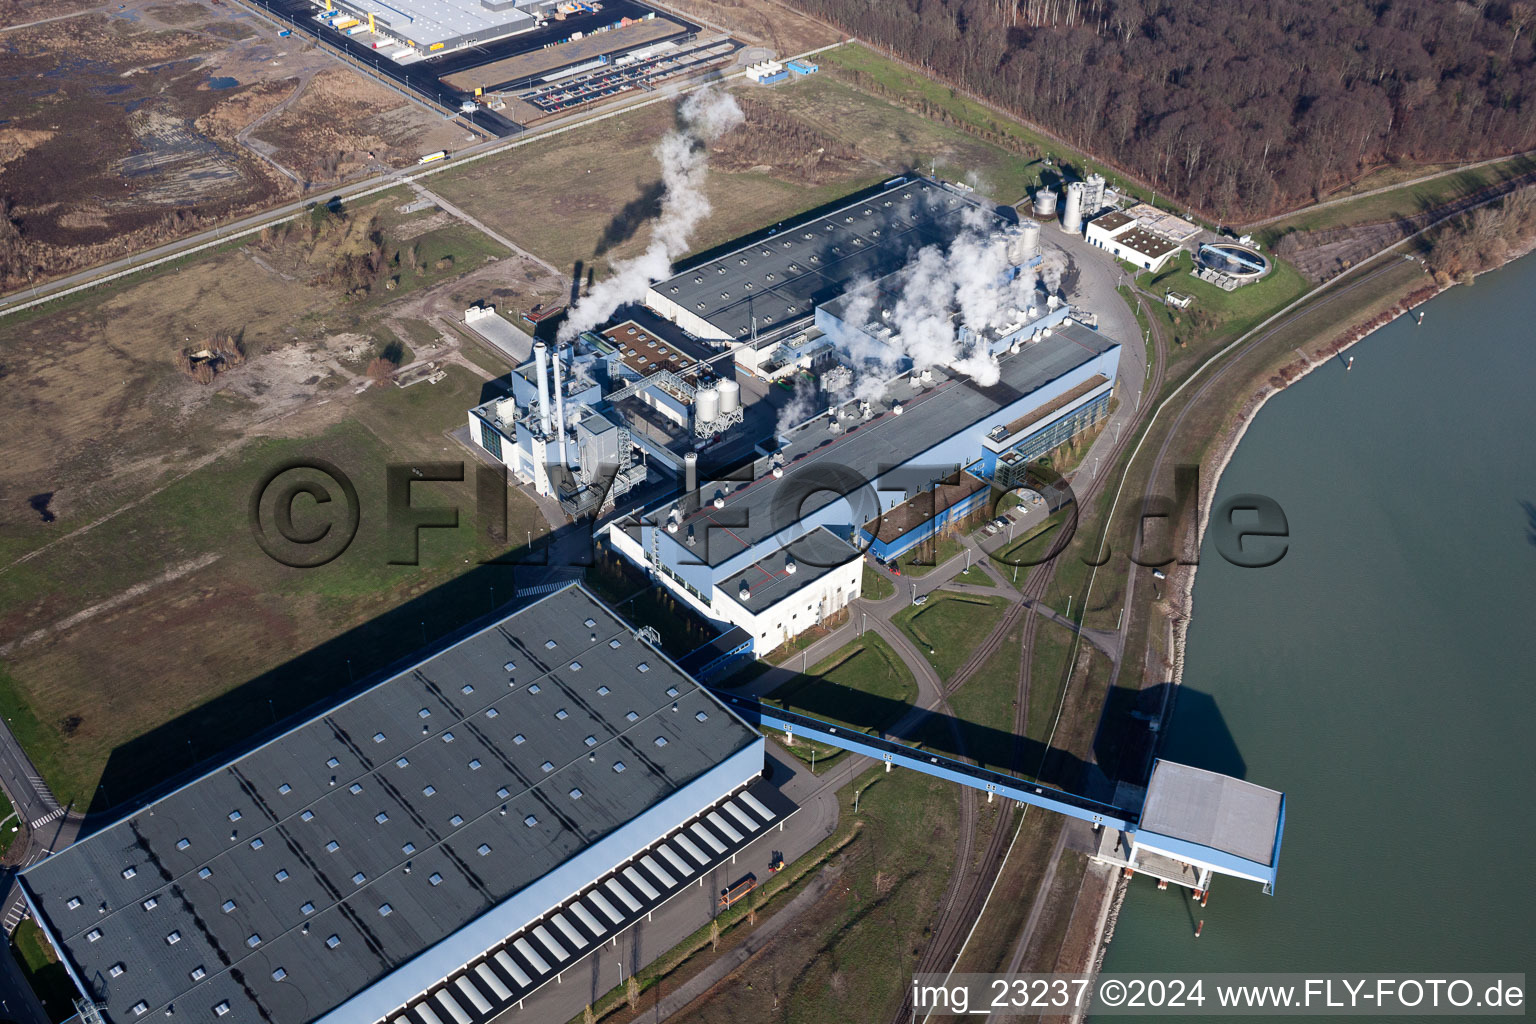 Aerial view of Building and production halls on the premises of Papierfabrik Palm GmbH & Co. KG in the district Industriegebiet Woerth-Oberwald in Woerth am Rhein in the state Rhineland-Palatinate